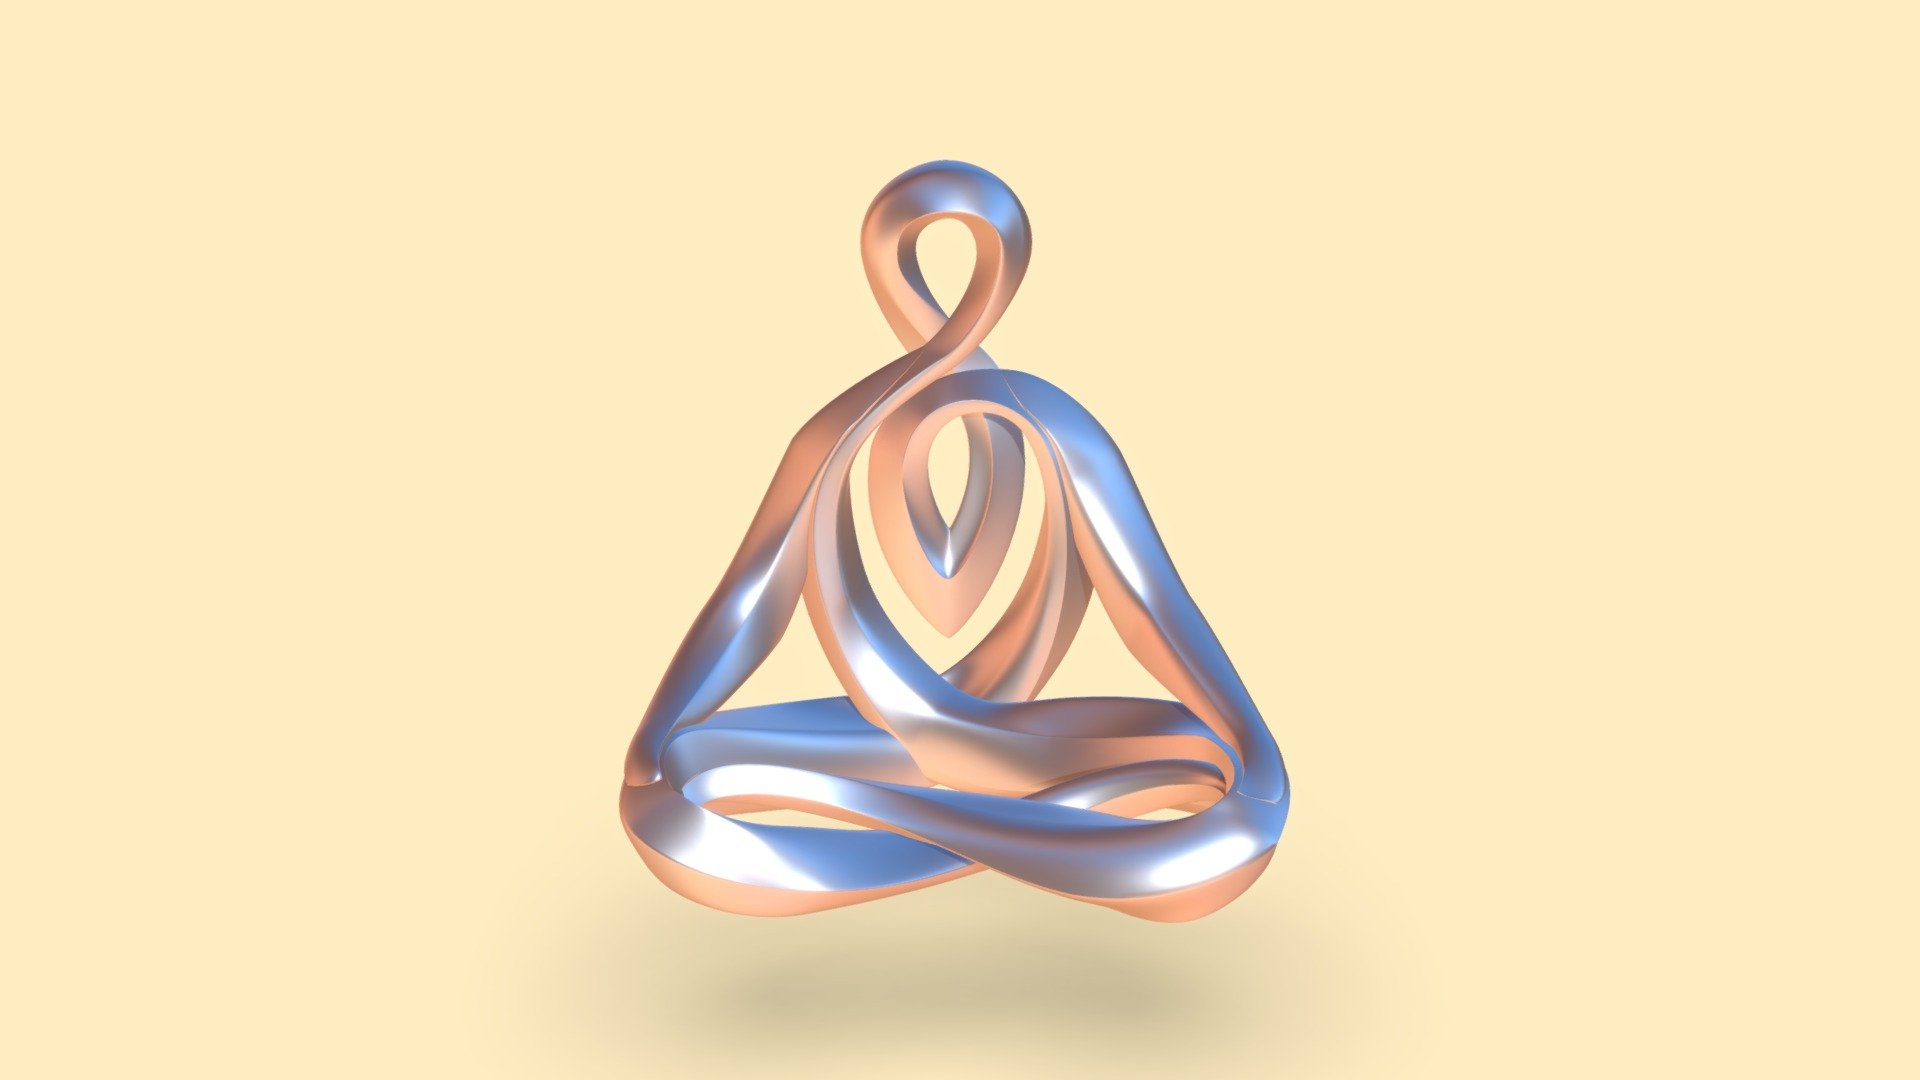 Simple lines of sitting yoga man in lotus meditation. Ready for 3d-print. Author`s work.

Version 2 (with heart): https://skfb.ly/6VqpZ

With snake like little Buddha: https://skfb.ly/onXTO

With wings: https://skfb.ly/op9RJ

Patron of the arts: Konstantin Kazantsev. — Yo, man! Wasssap 3d model